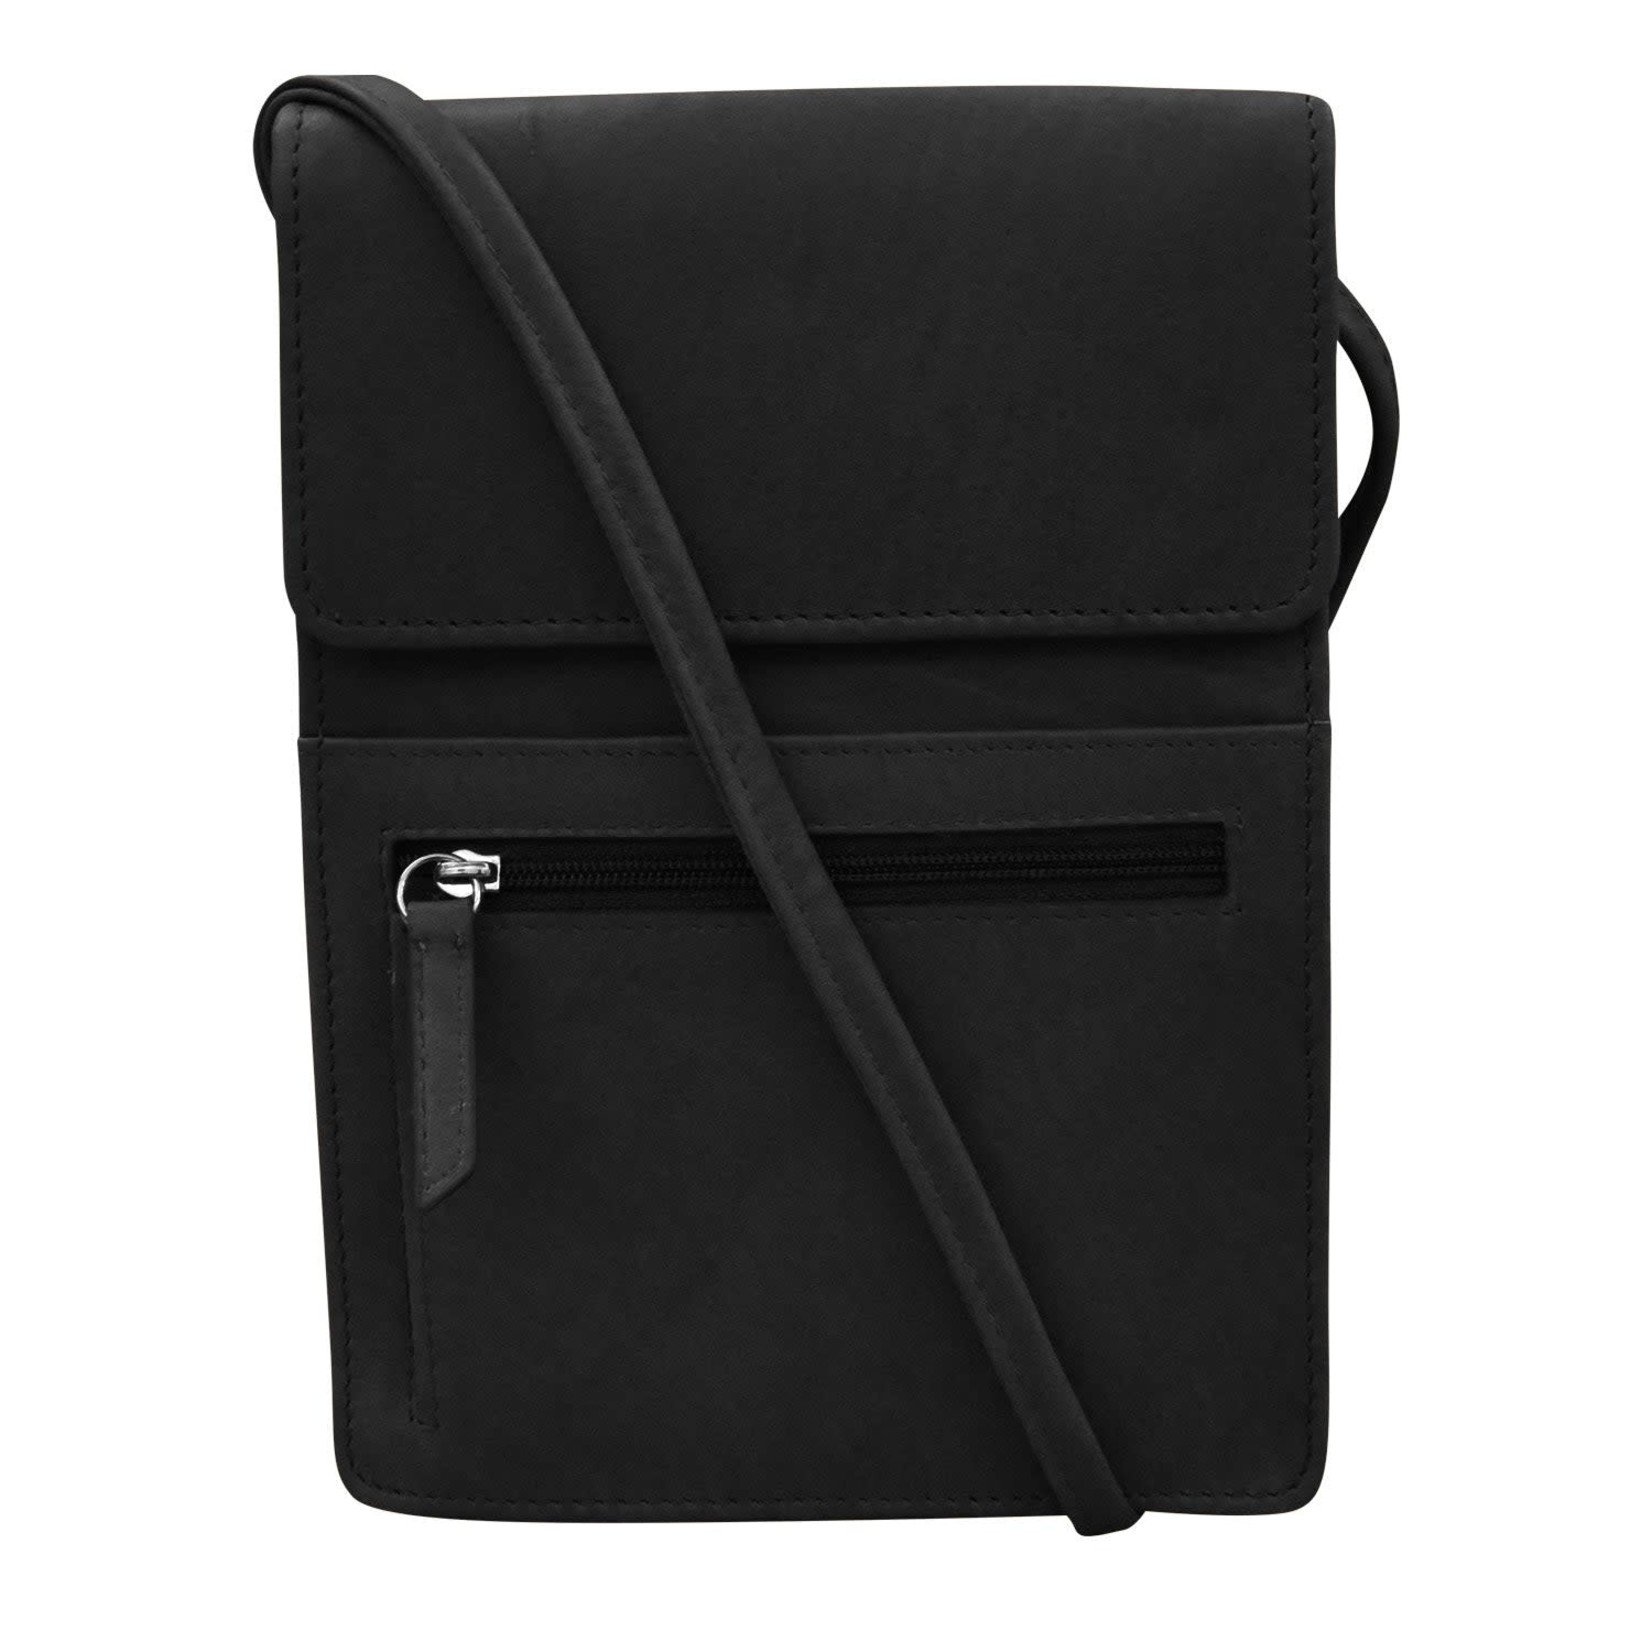 Leather Handbags and Accessories 6824 Black - Organizer On String